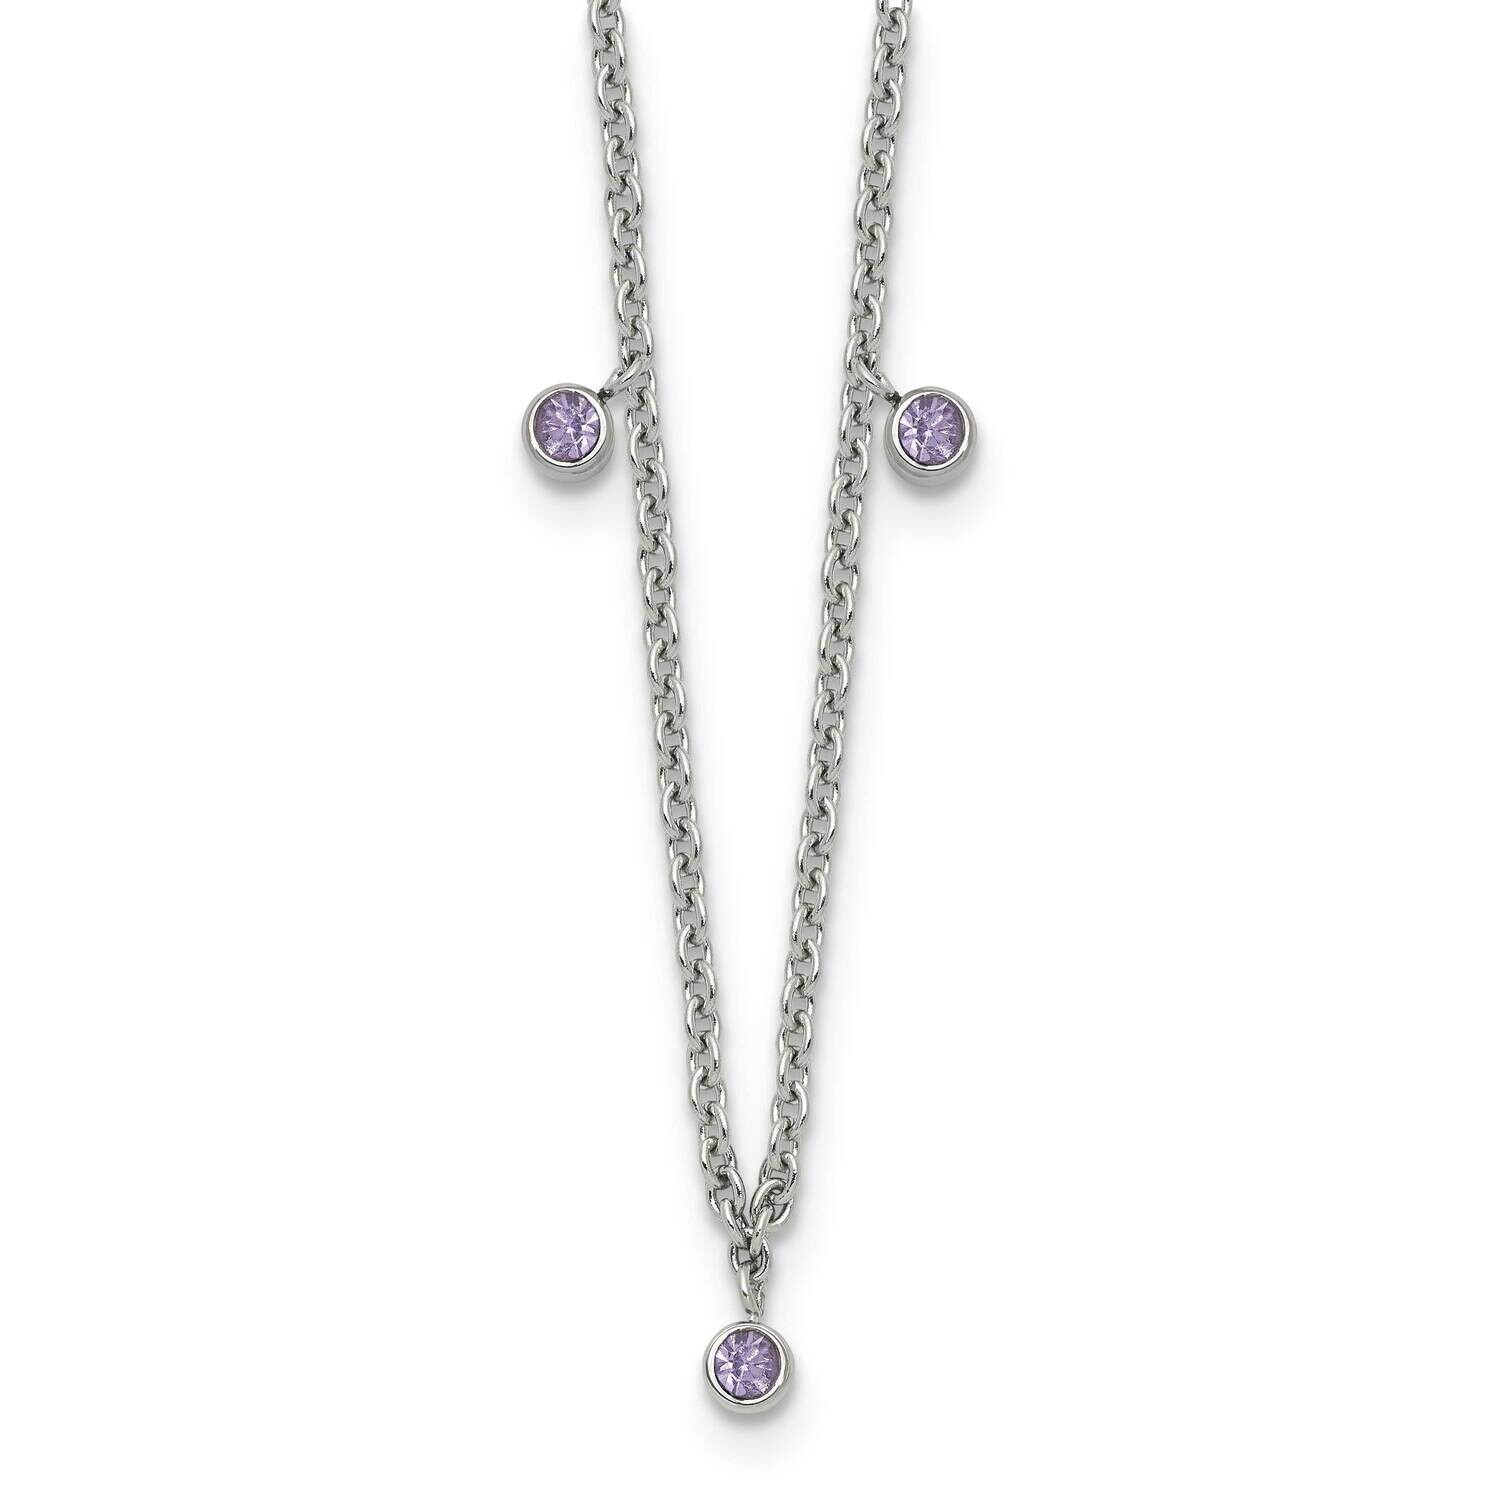 Polished Purple Crystal 17.5 Inch 2 Inch Extension Necklace Stainless Steel SRN3087PU-17.5